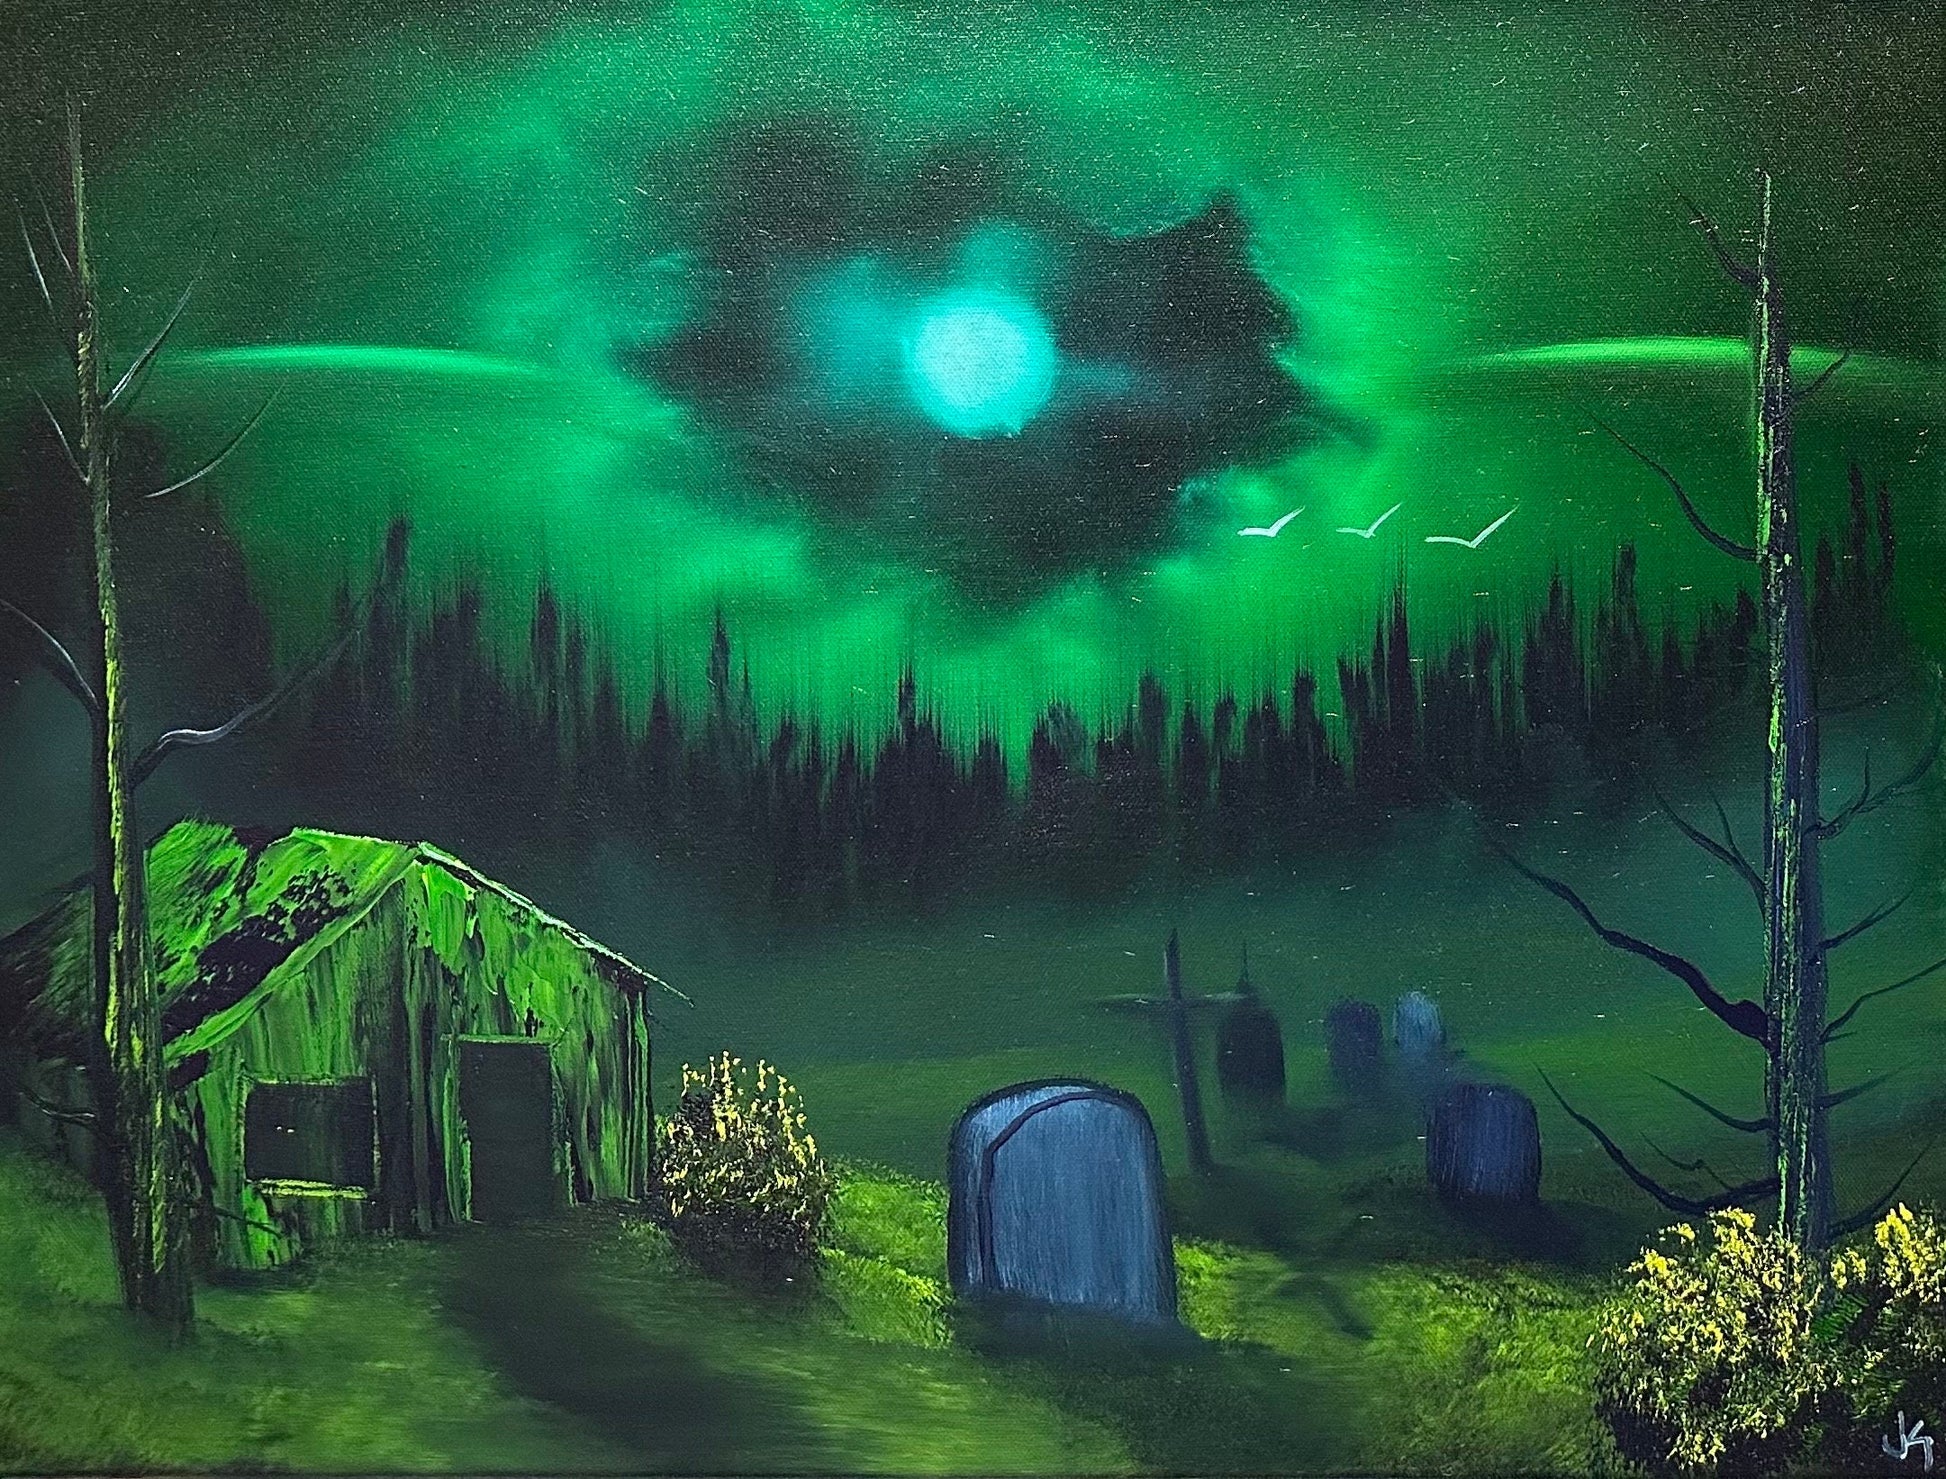 Painting 986 - 18x24" Halloween UFO Graveyard Landscape painted in Class on 10/19/23 by PaintWithJosh